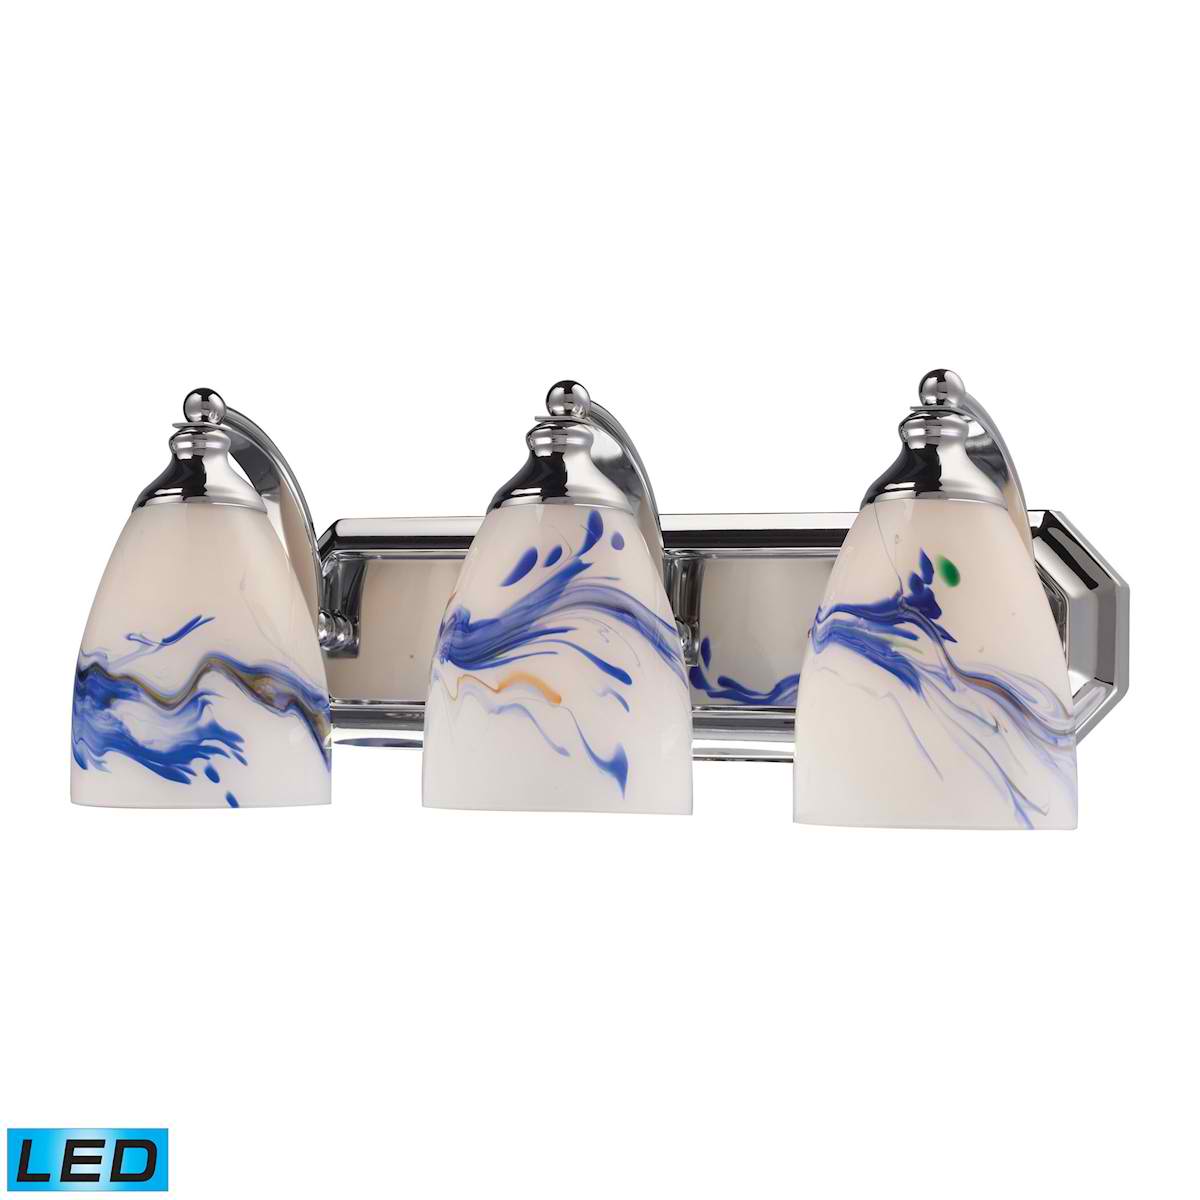 3 Light Vanity in Polished Chrome and Mountain Glass - LED, 800 Lumens (2400 Lumens Total) with Full Scale